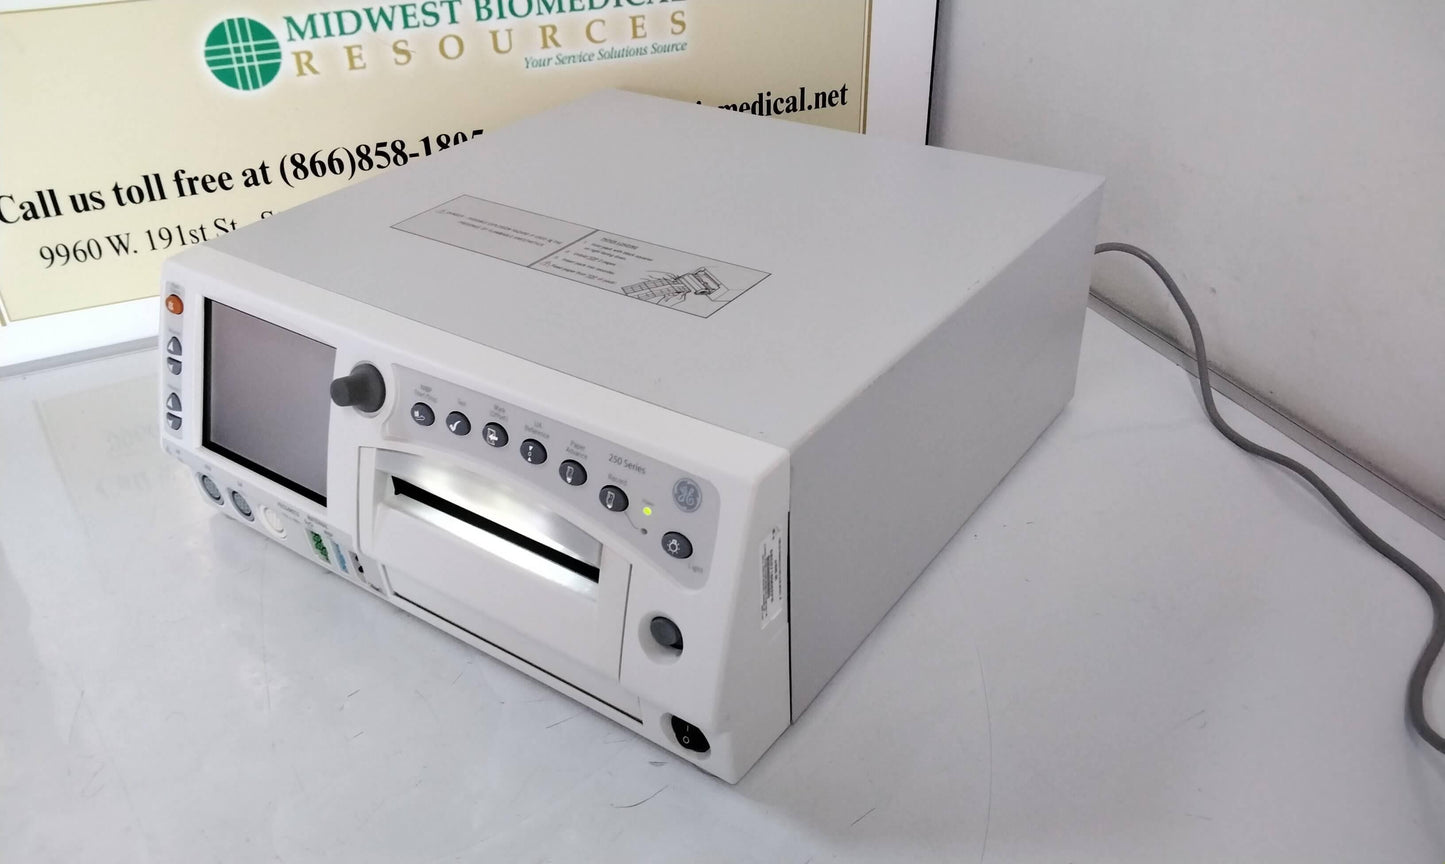 USED GE Corometrics 259CX Fetal Monitor 2024489 with Free Shipping and Warranty - MBR Medicals